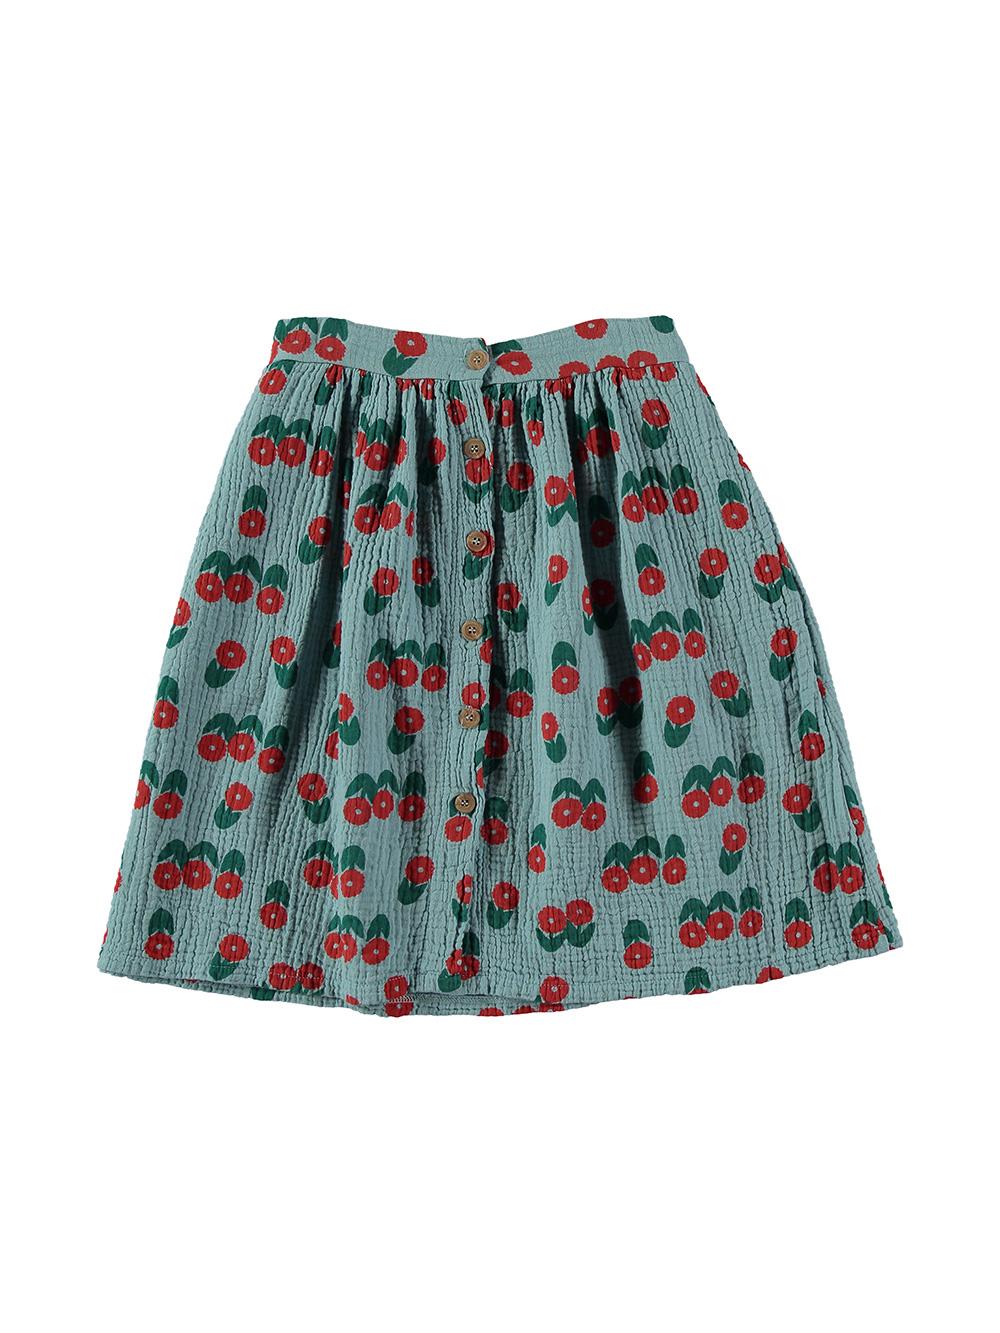 BLUE SKIRT WITH RED FLOWER PRINT